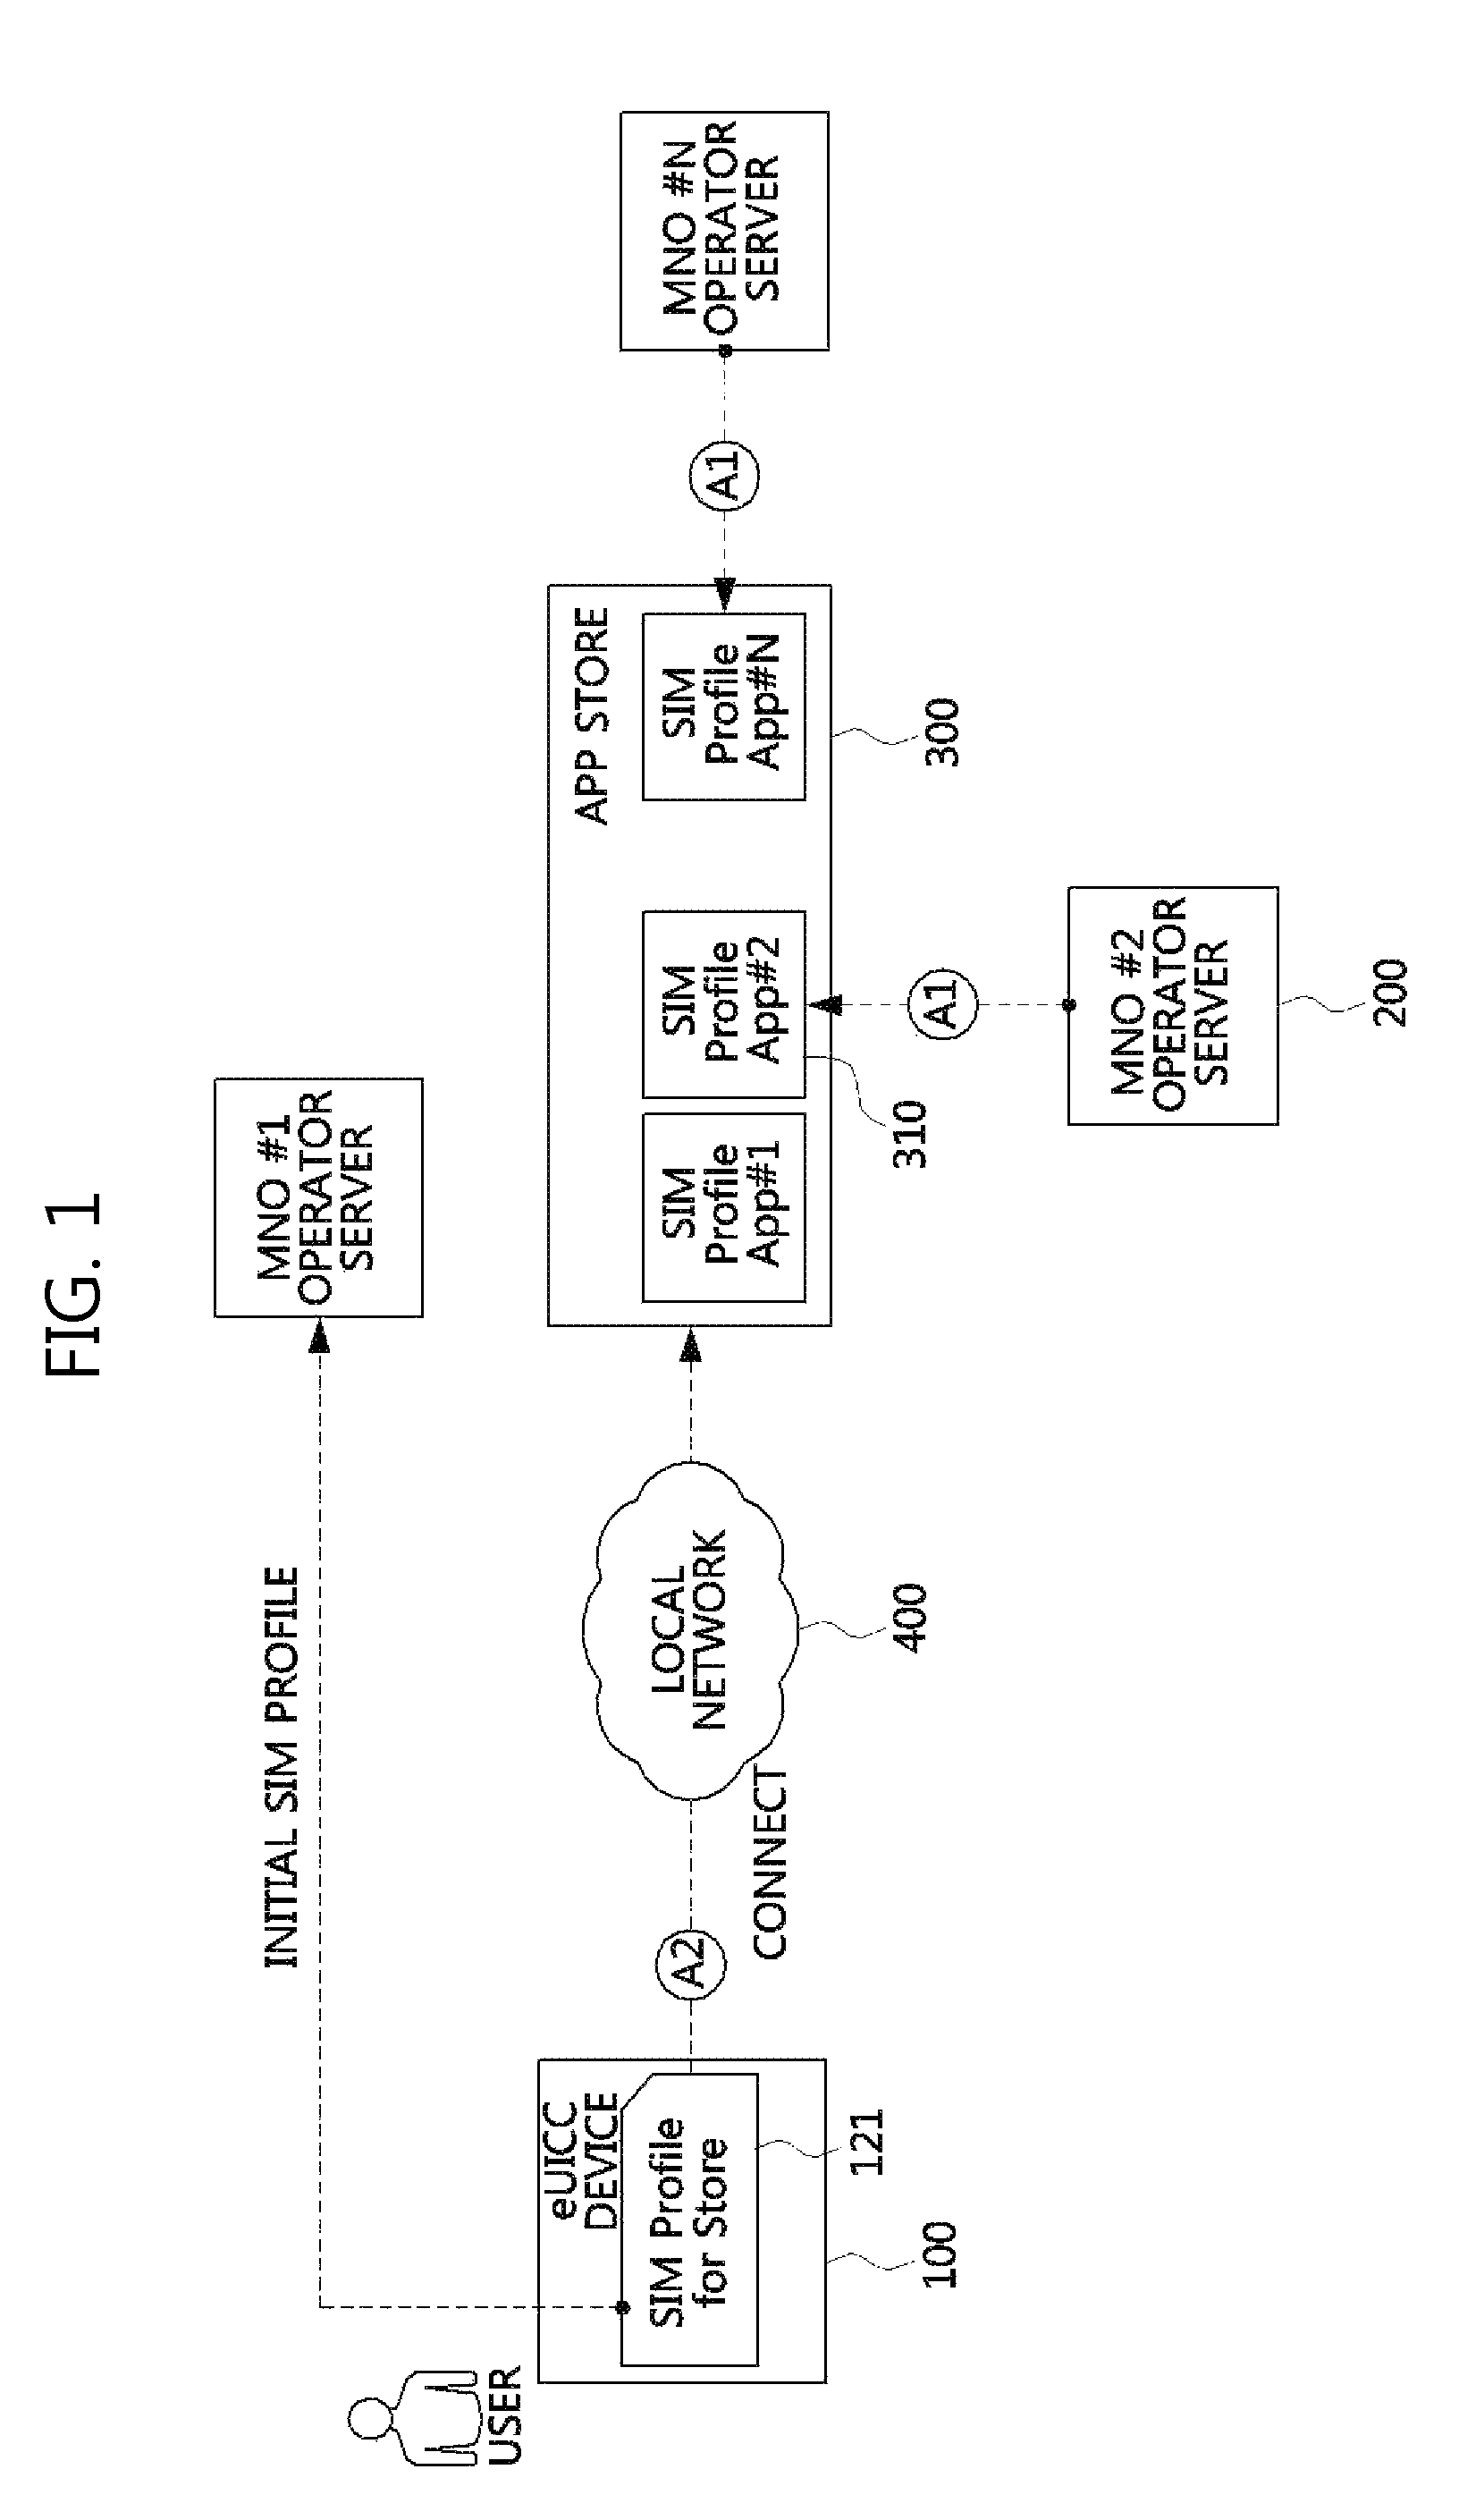 Method for providing SIM profile in eUICC environment and devices therefor